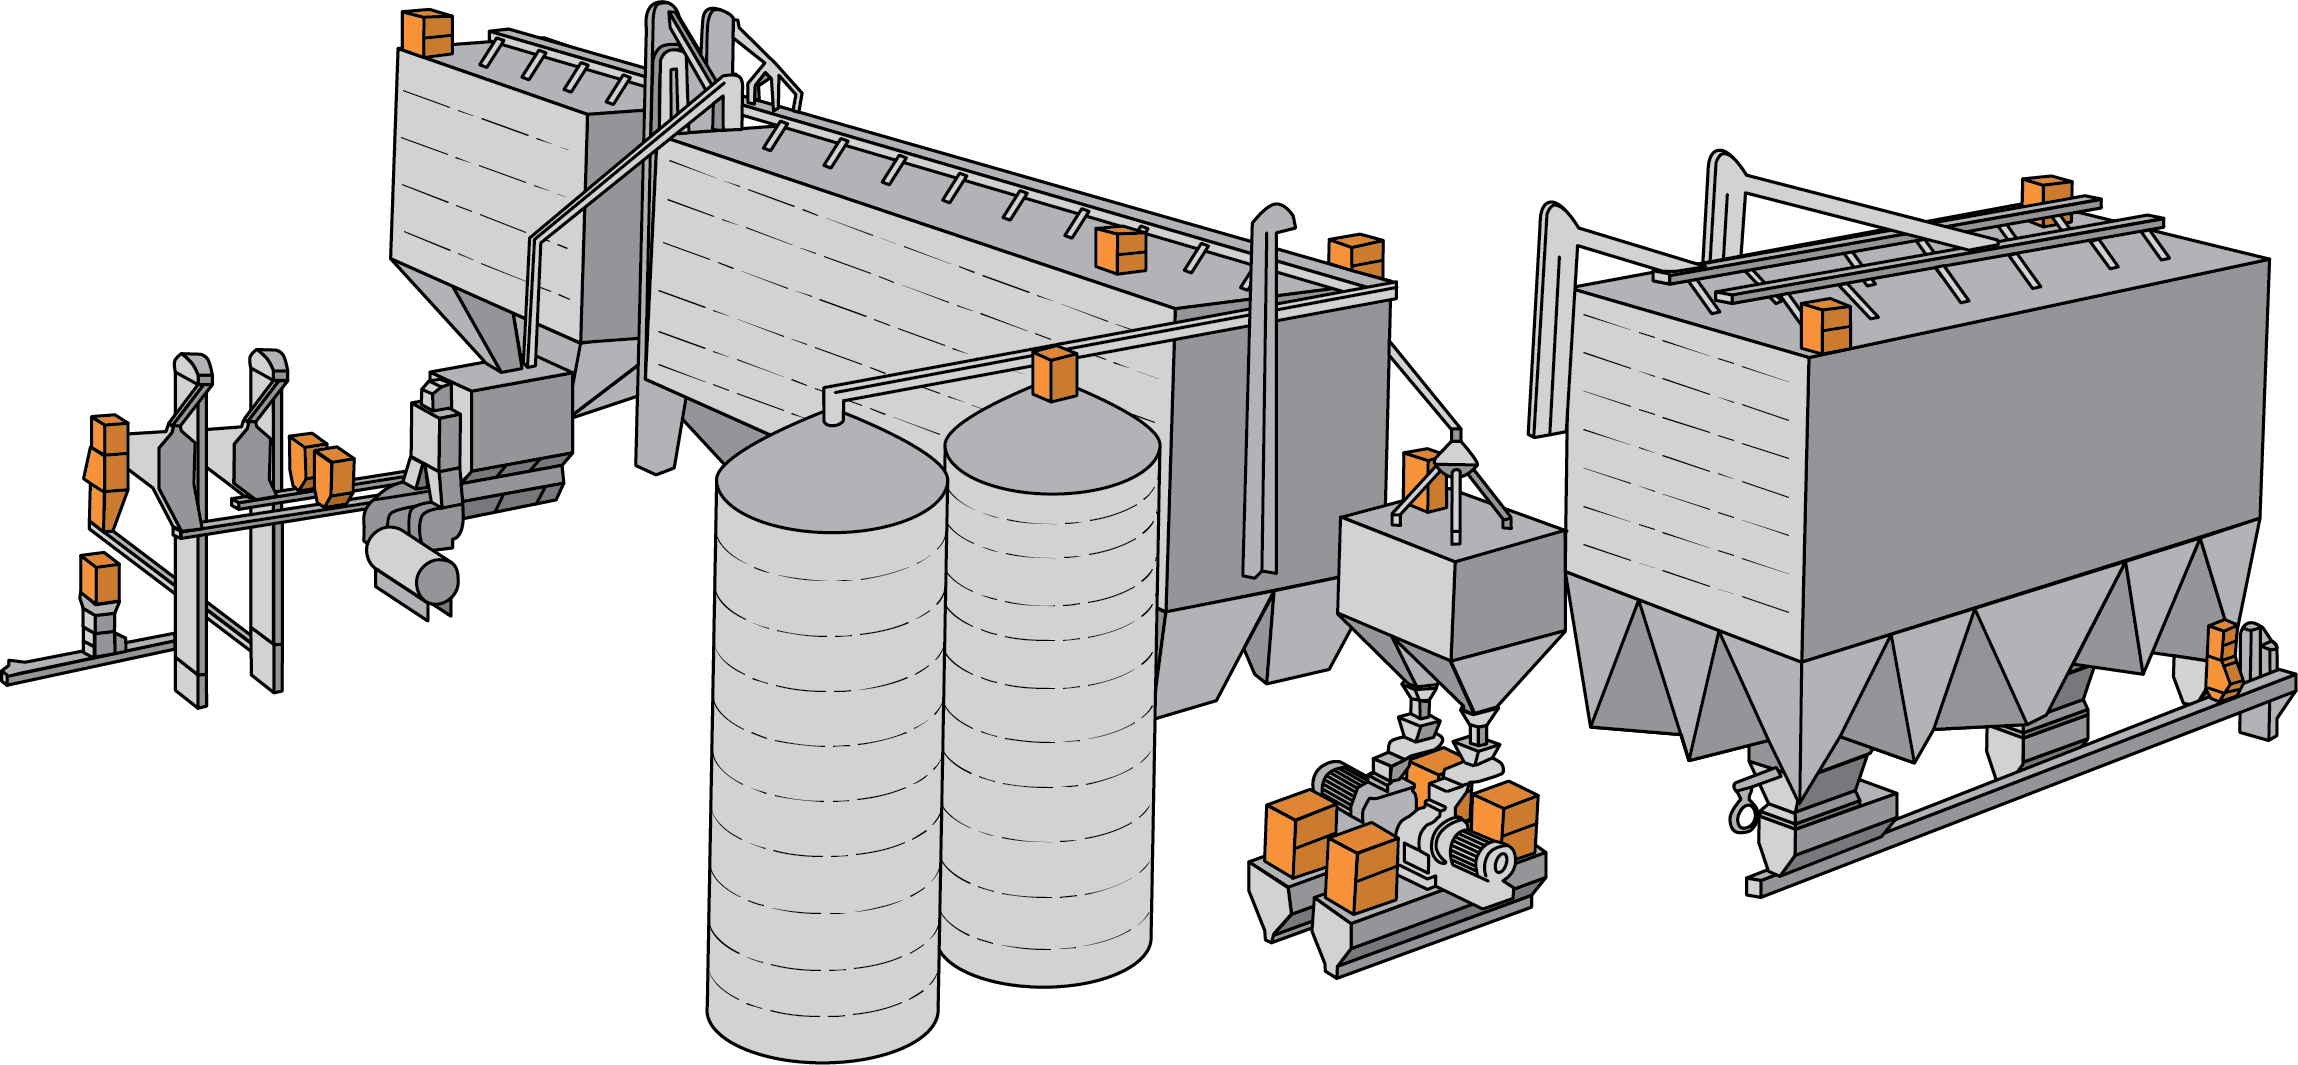 Illustration of the locations of dust collection unit systems throughout a plant.